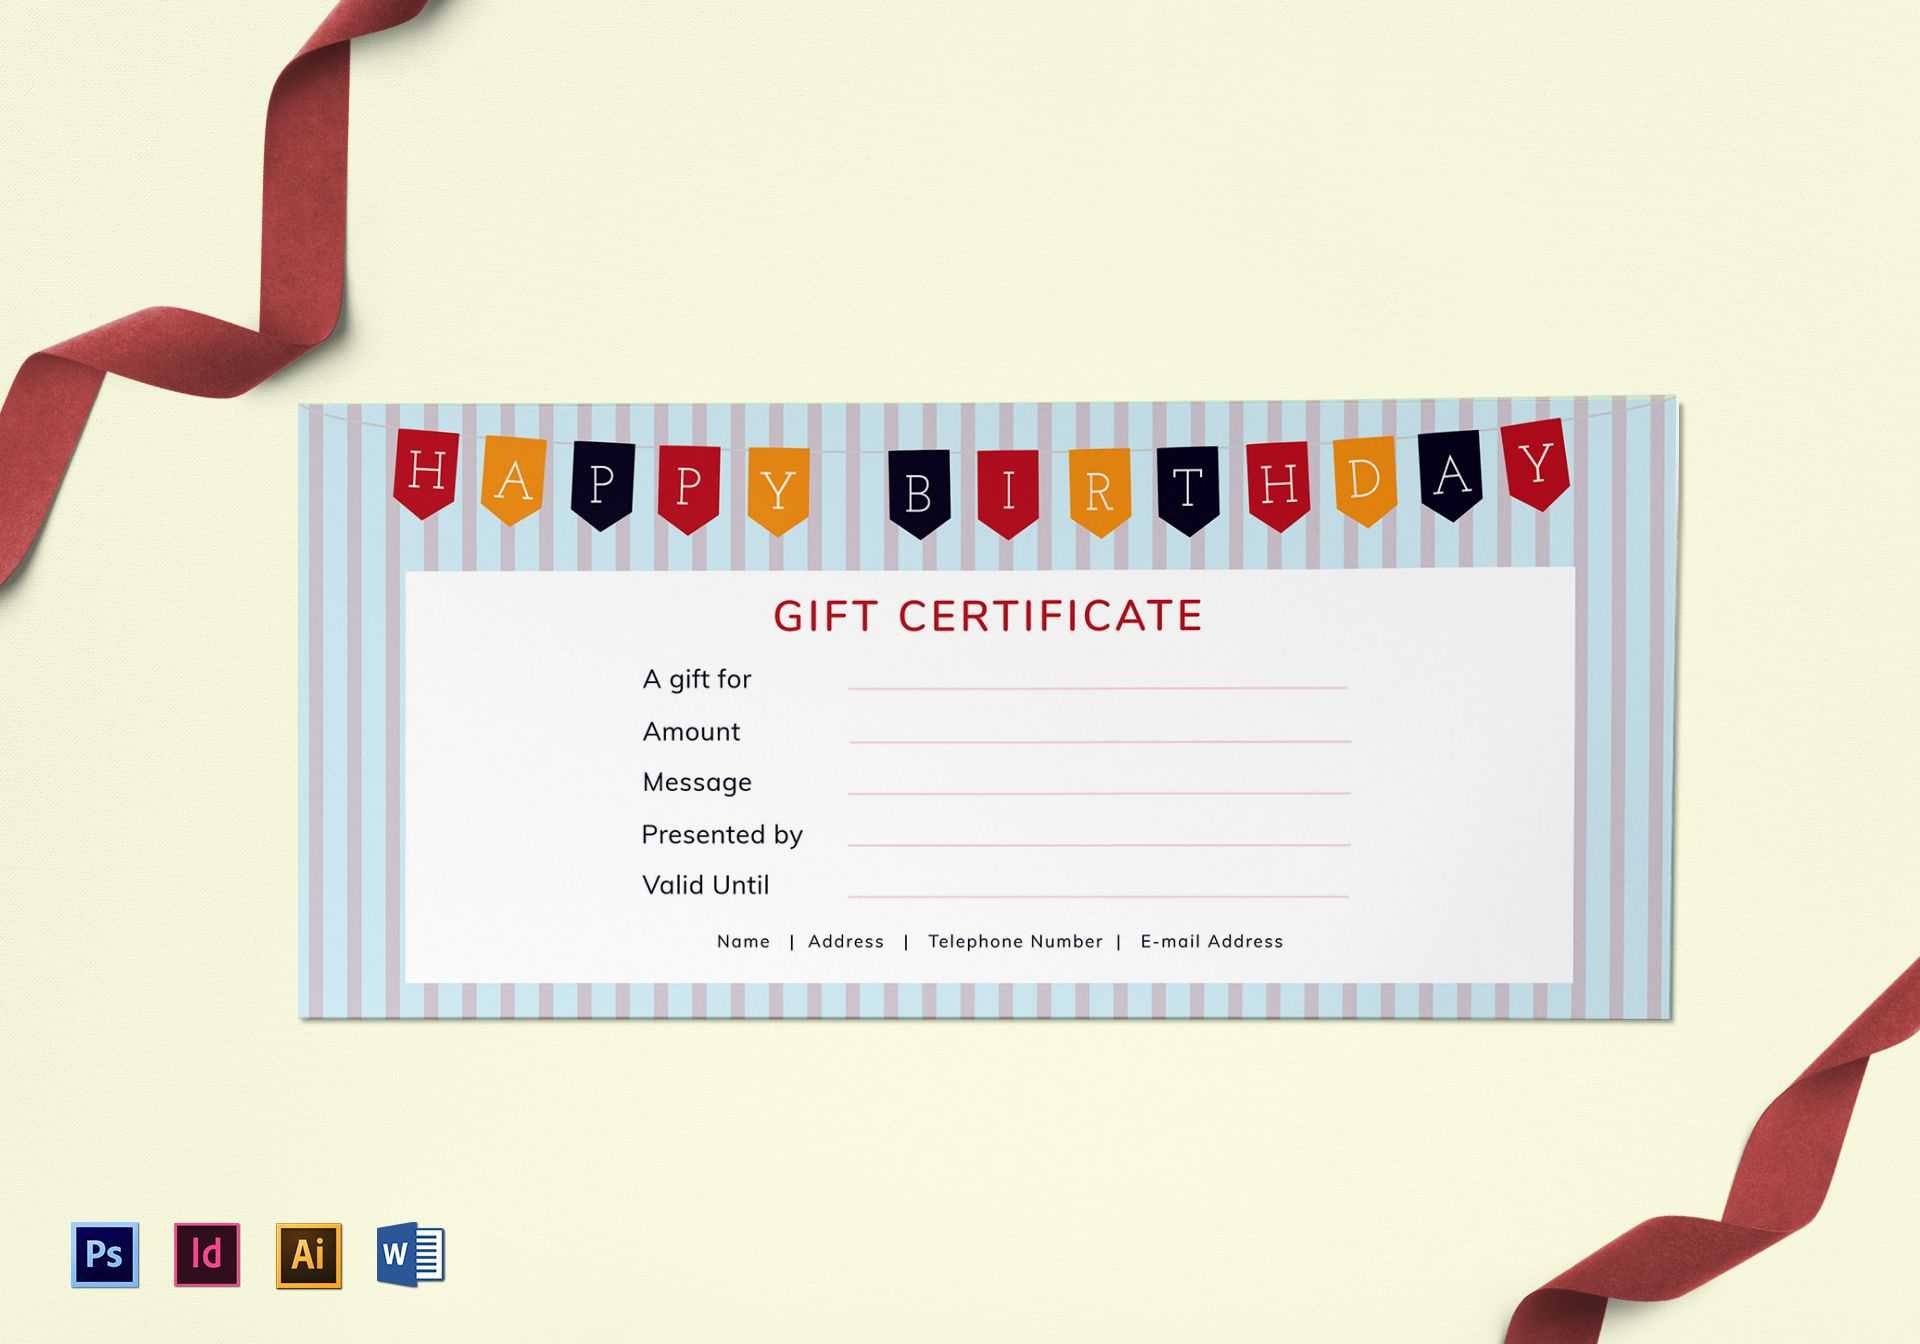 Happy Birthday Gift Certificate Template With Regard To Gift Certificate Template Photoshop